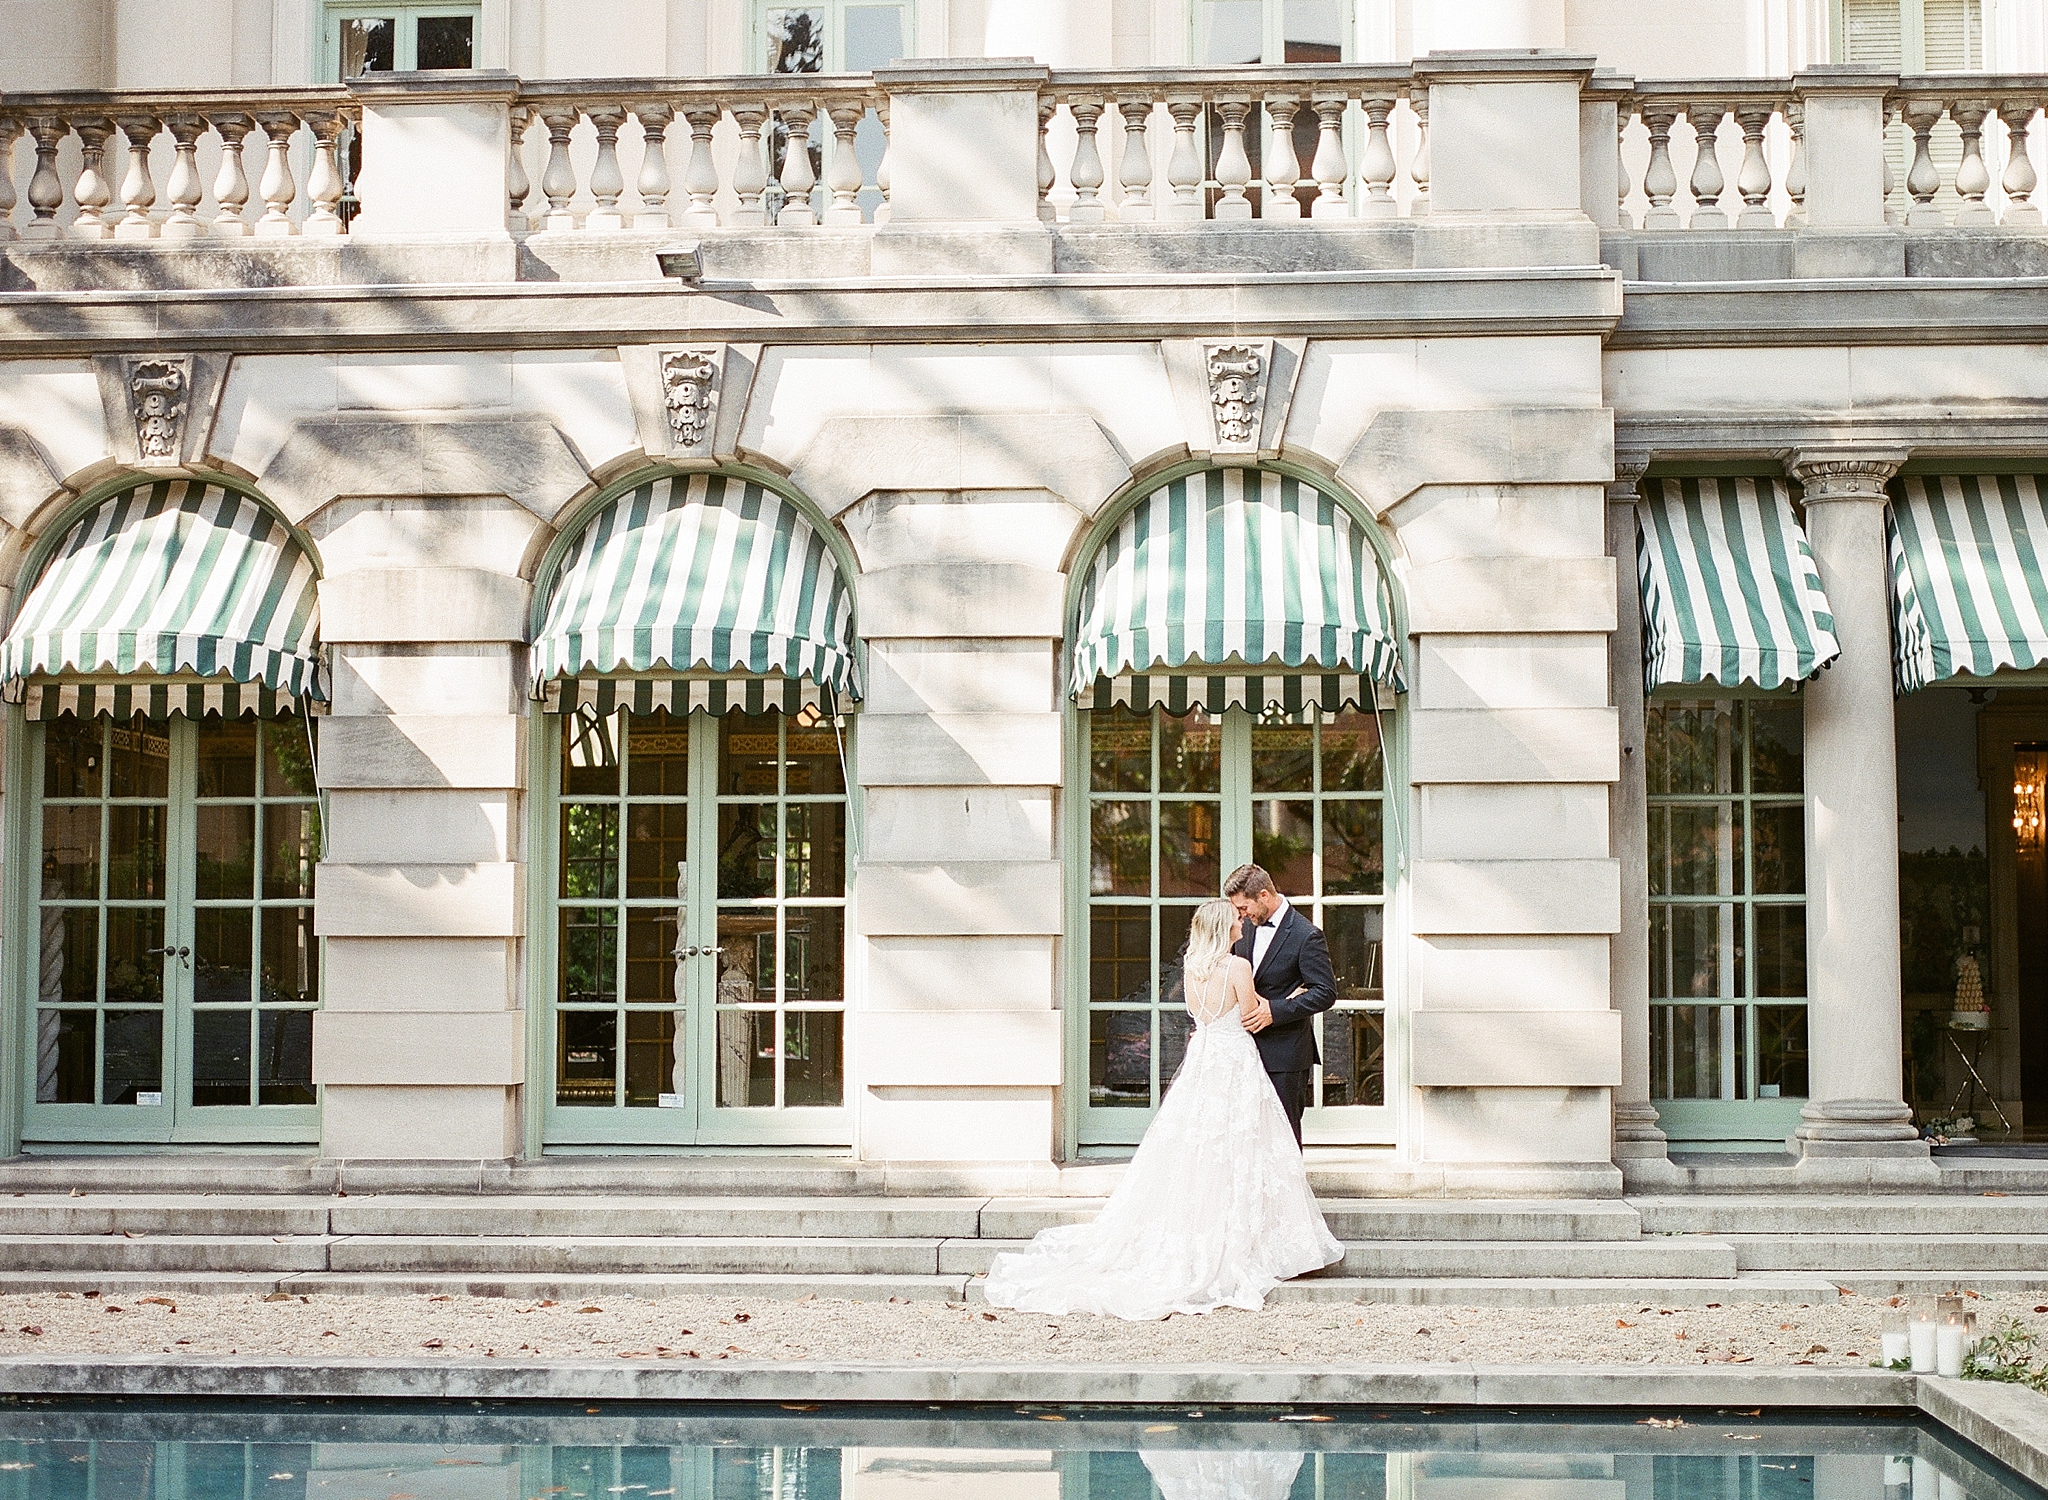 A sneak peek at Heloise & David's Anderson House Wedding at The Society of the Cincinnati in Washington, DC by fine art film photographer, Alicia Lacey.